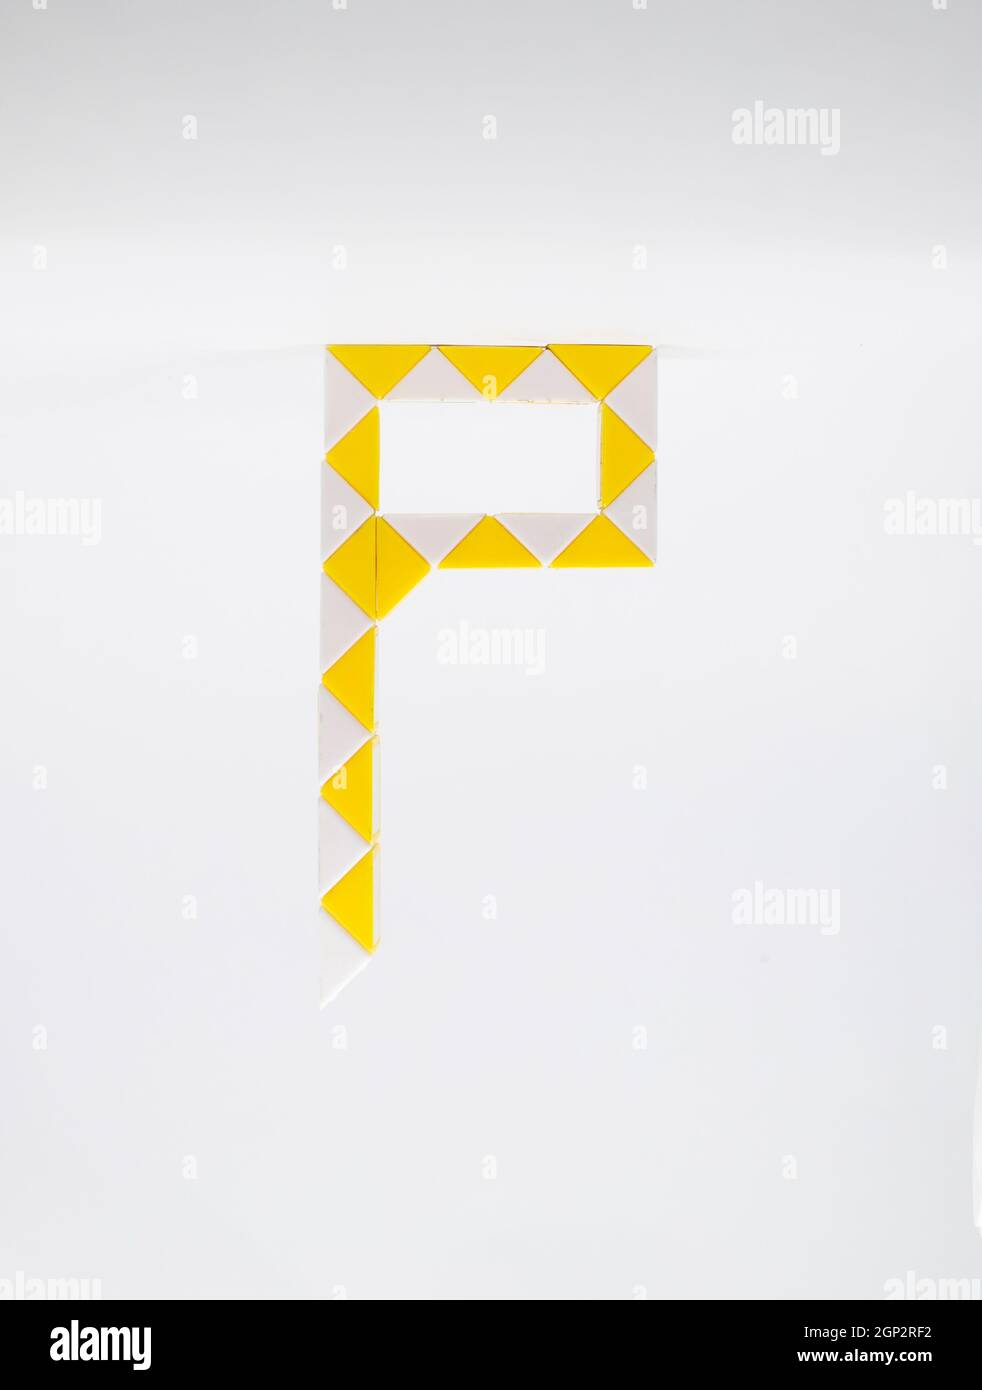 Letter 'p' made of yellow and white triangles on a white background. Stock Photo